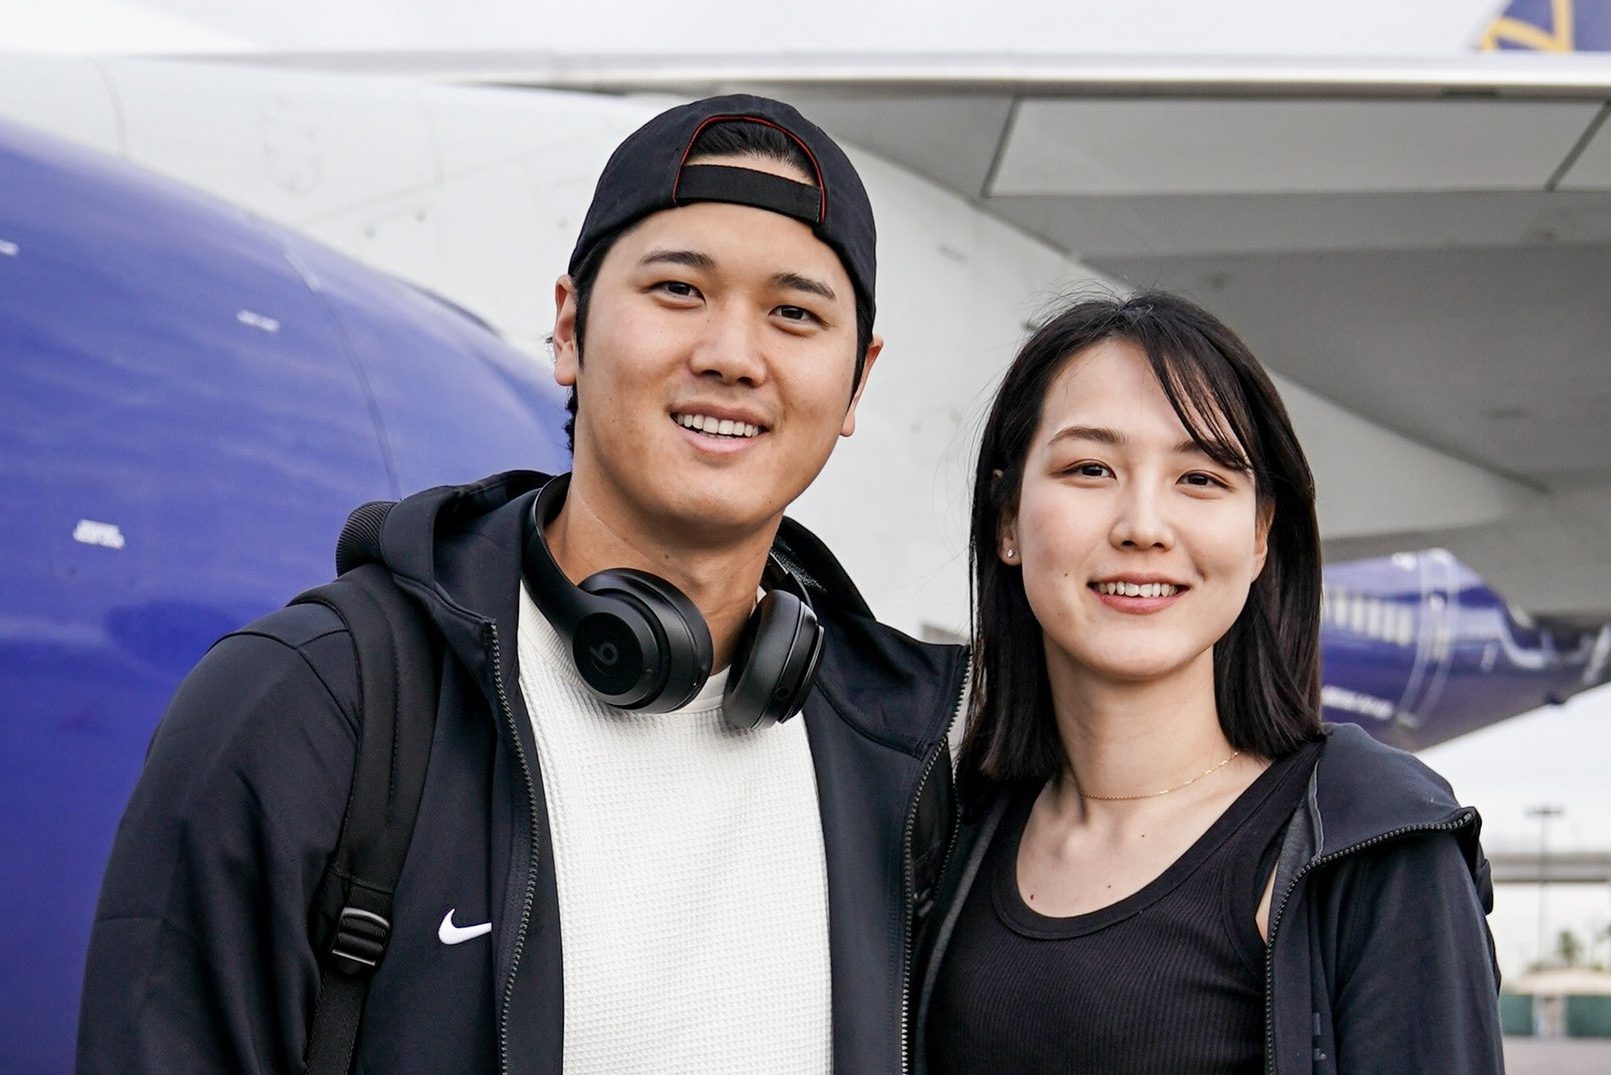 Shohei Ohtani and his wife Mamiko Tanaka in a photo posted on the Los Angeles Dodgers' X account.